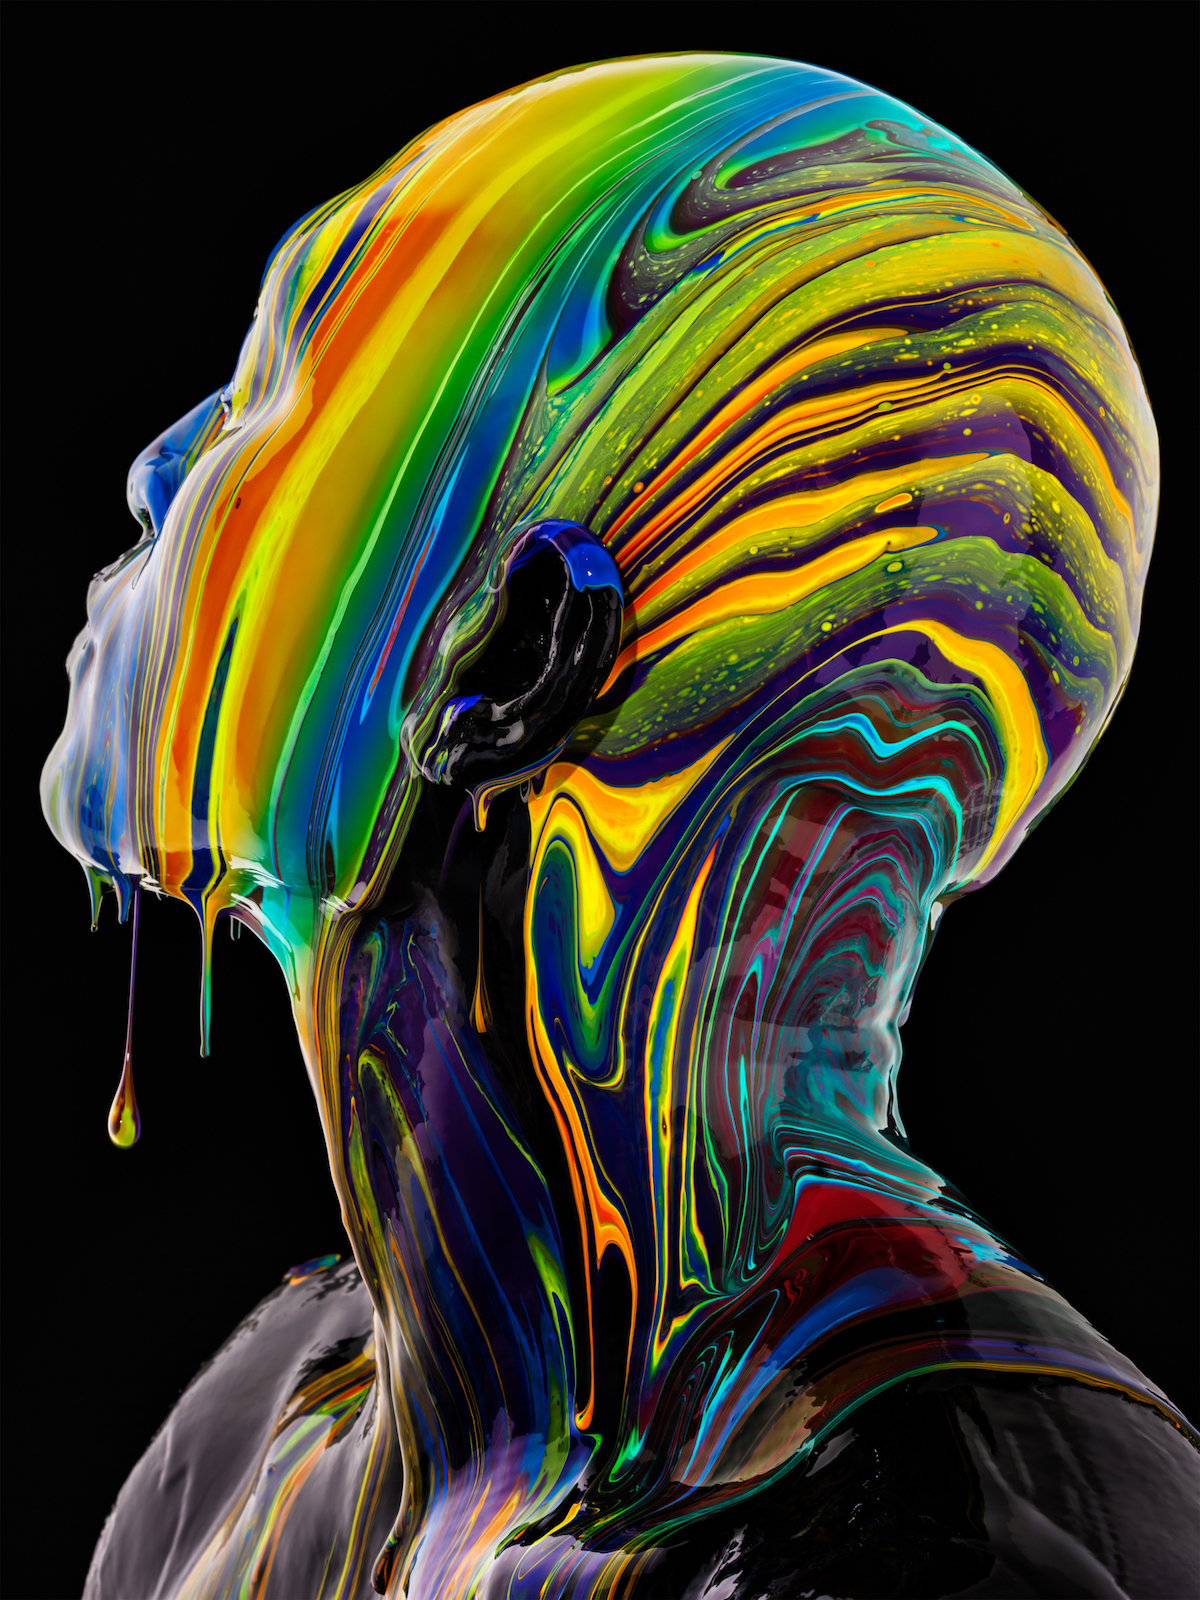 'Black Is a Color' Paint Drip Photography by Tim Tadder